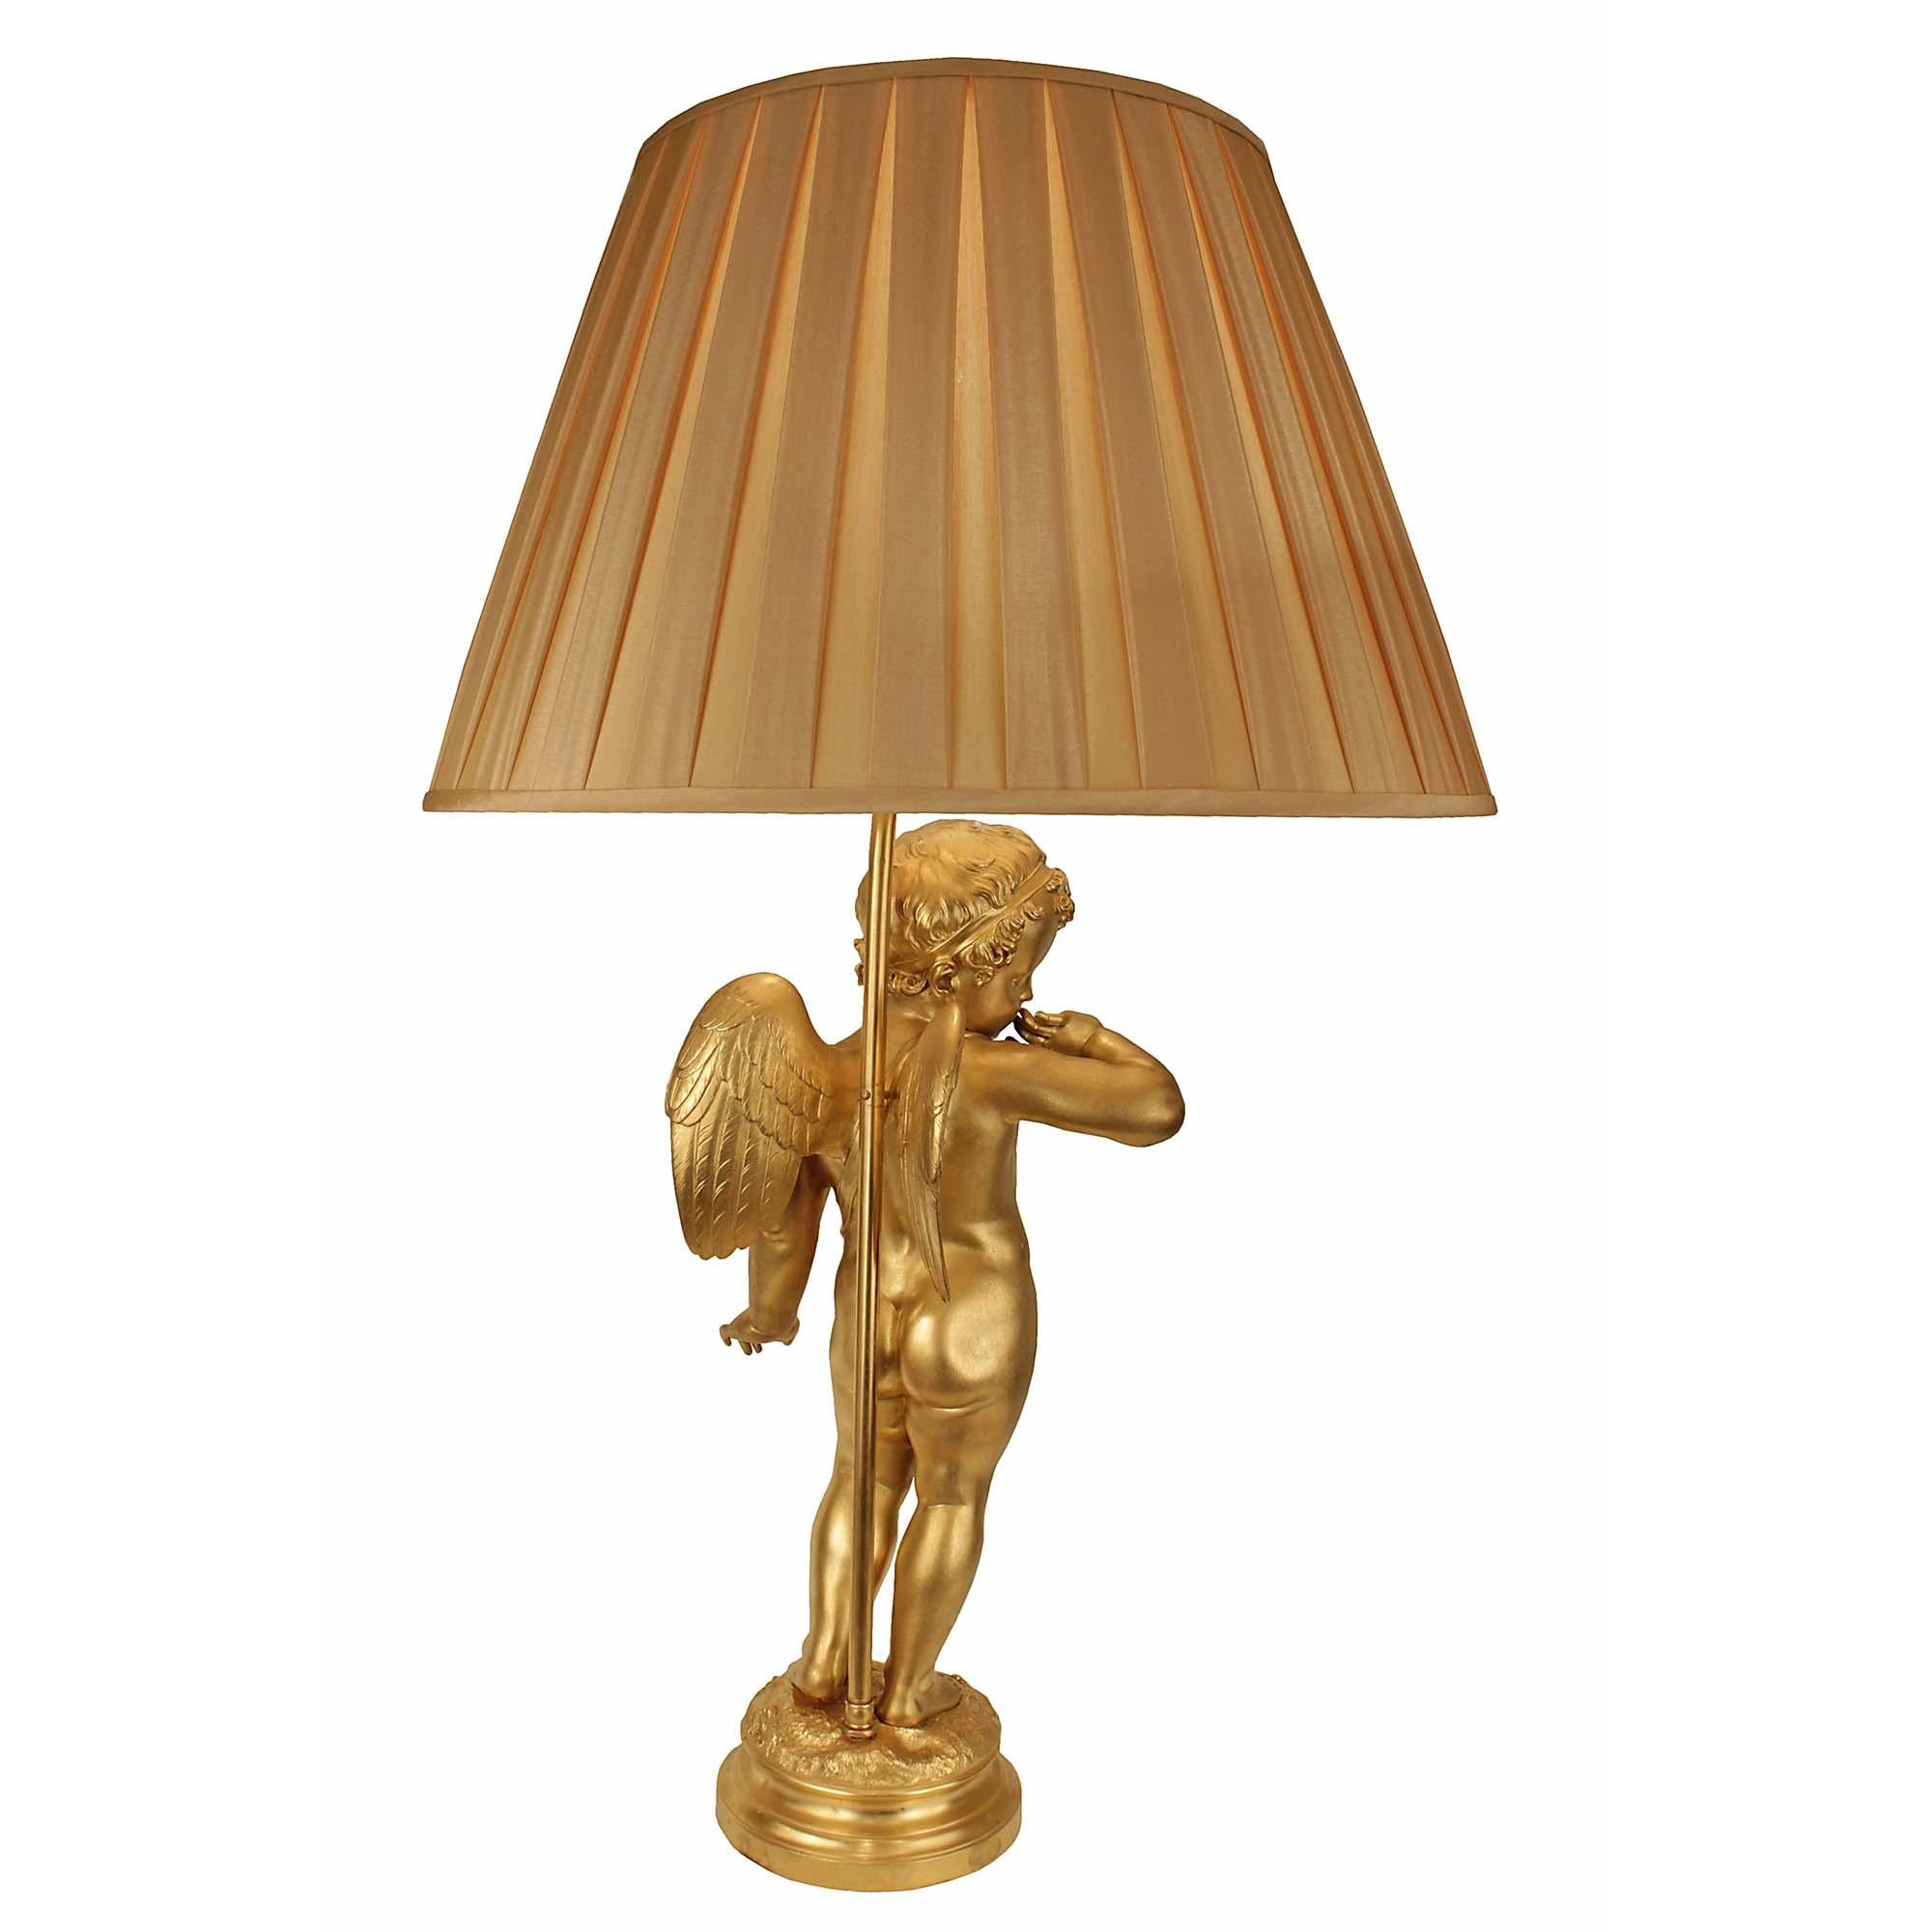 A stunning French 19th century ormolu cherub mounted in to a lamp, after a sculpture by Pigalle . The lamp is raised by a circular ormolu mottled base where the winged cherub stands on etched grass where the signature is displayed. The richly chased